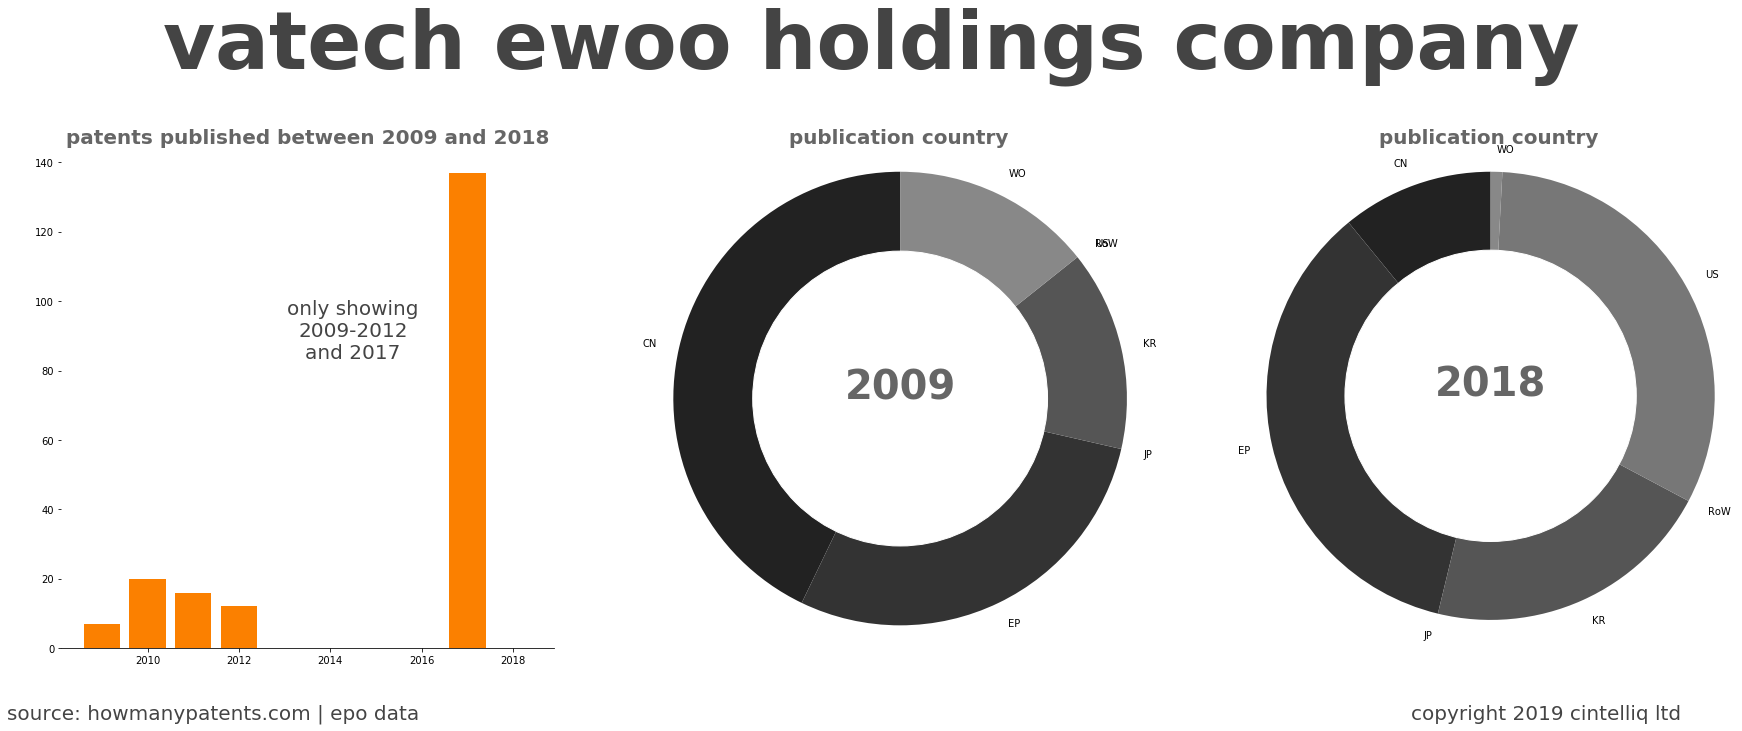 summary of patents for Vatech Ewoo Holdings Company